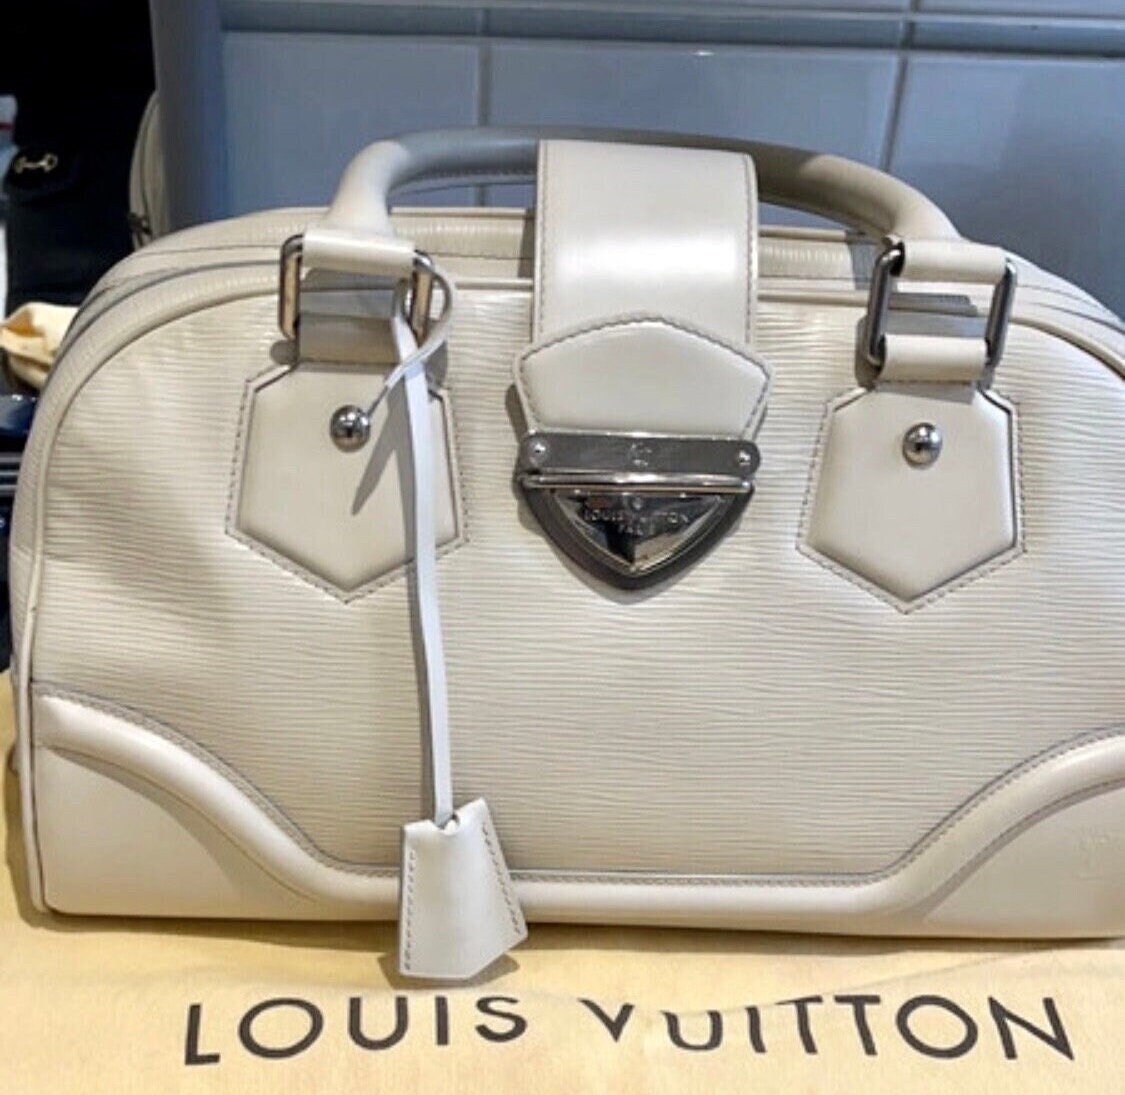 Louis Vuitton 3 Bags In One Switzerland, SAVE 38% 